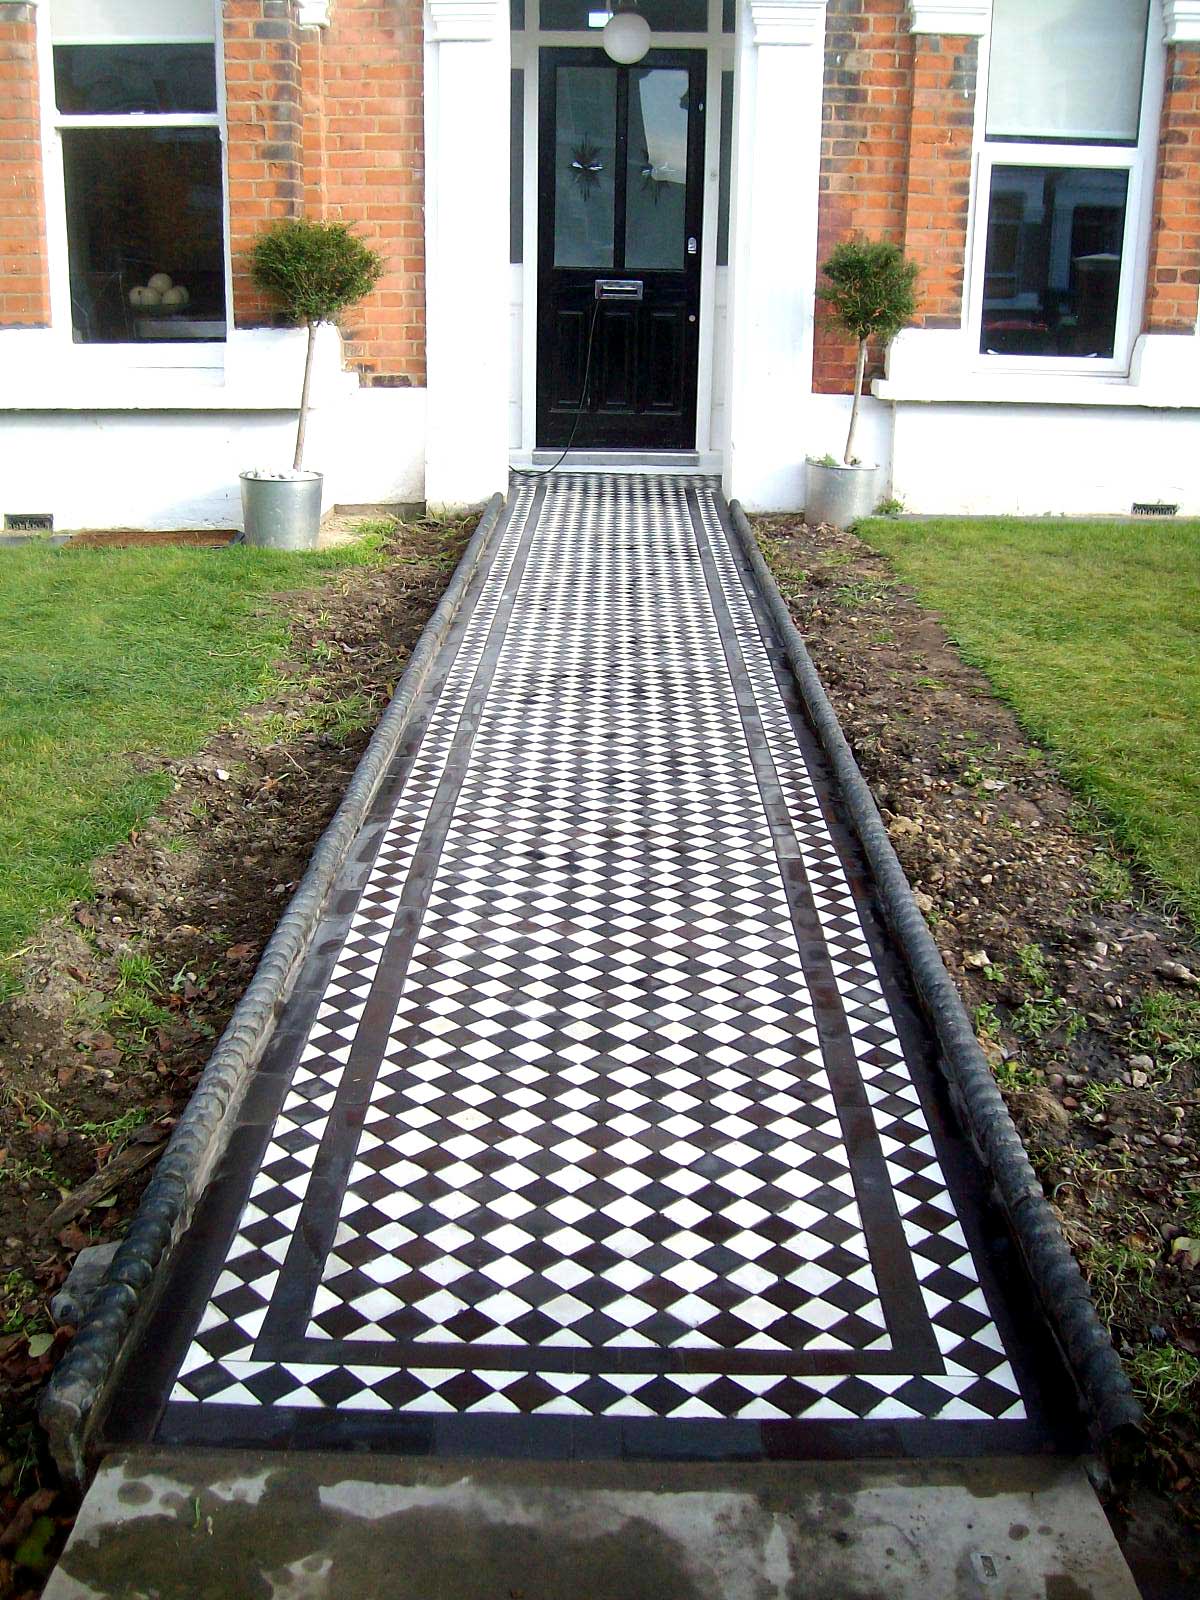 install-front-victorian-tiling-path-black-and-white-south-london